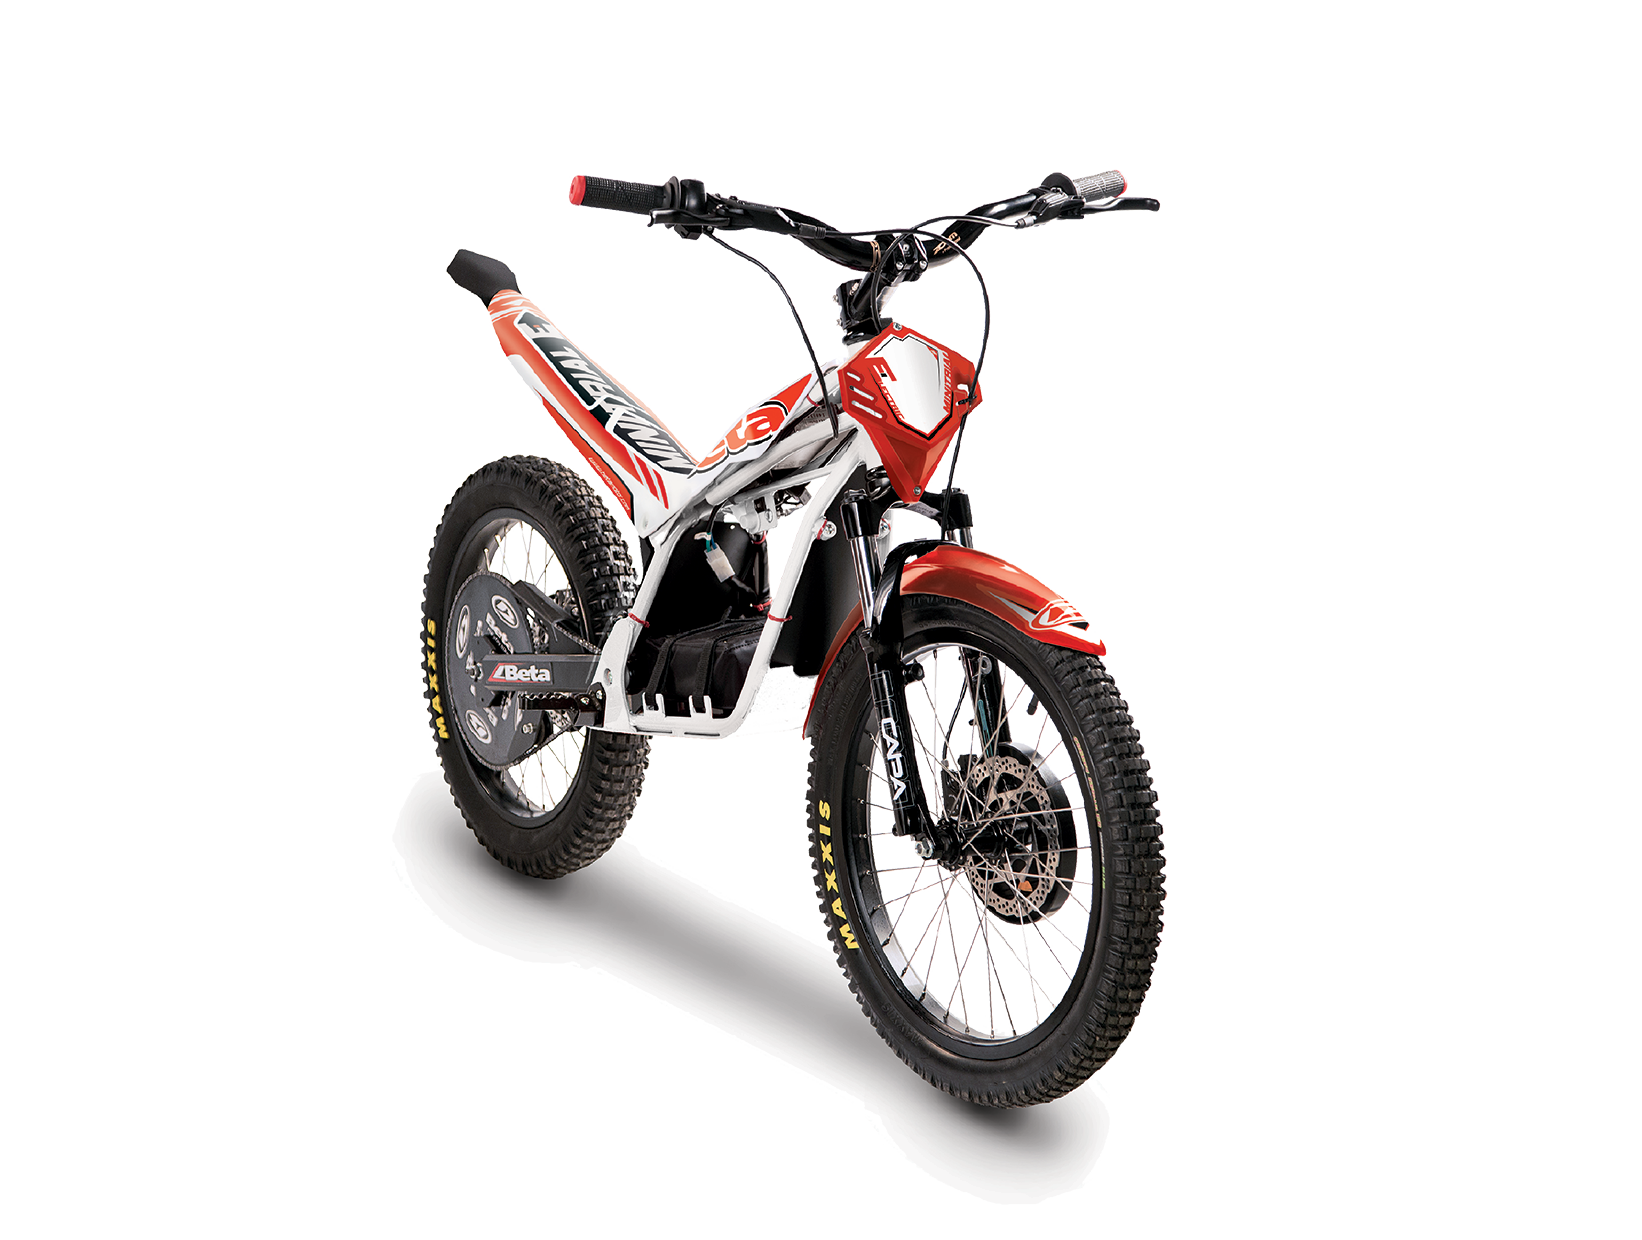 https://betamotorcycles.co.nz/wp-content/uploads/2020/11/MinitrialElectric20.png